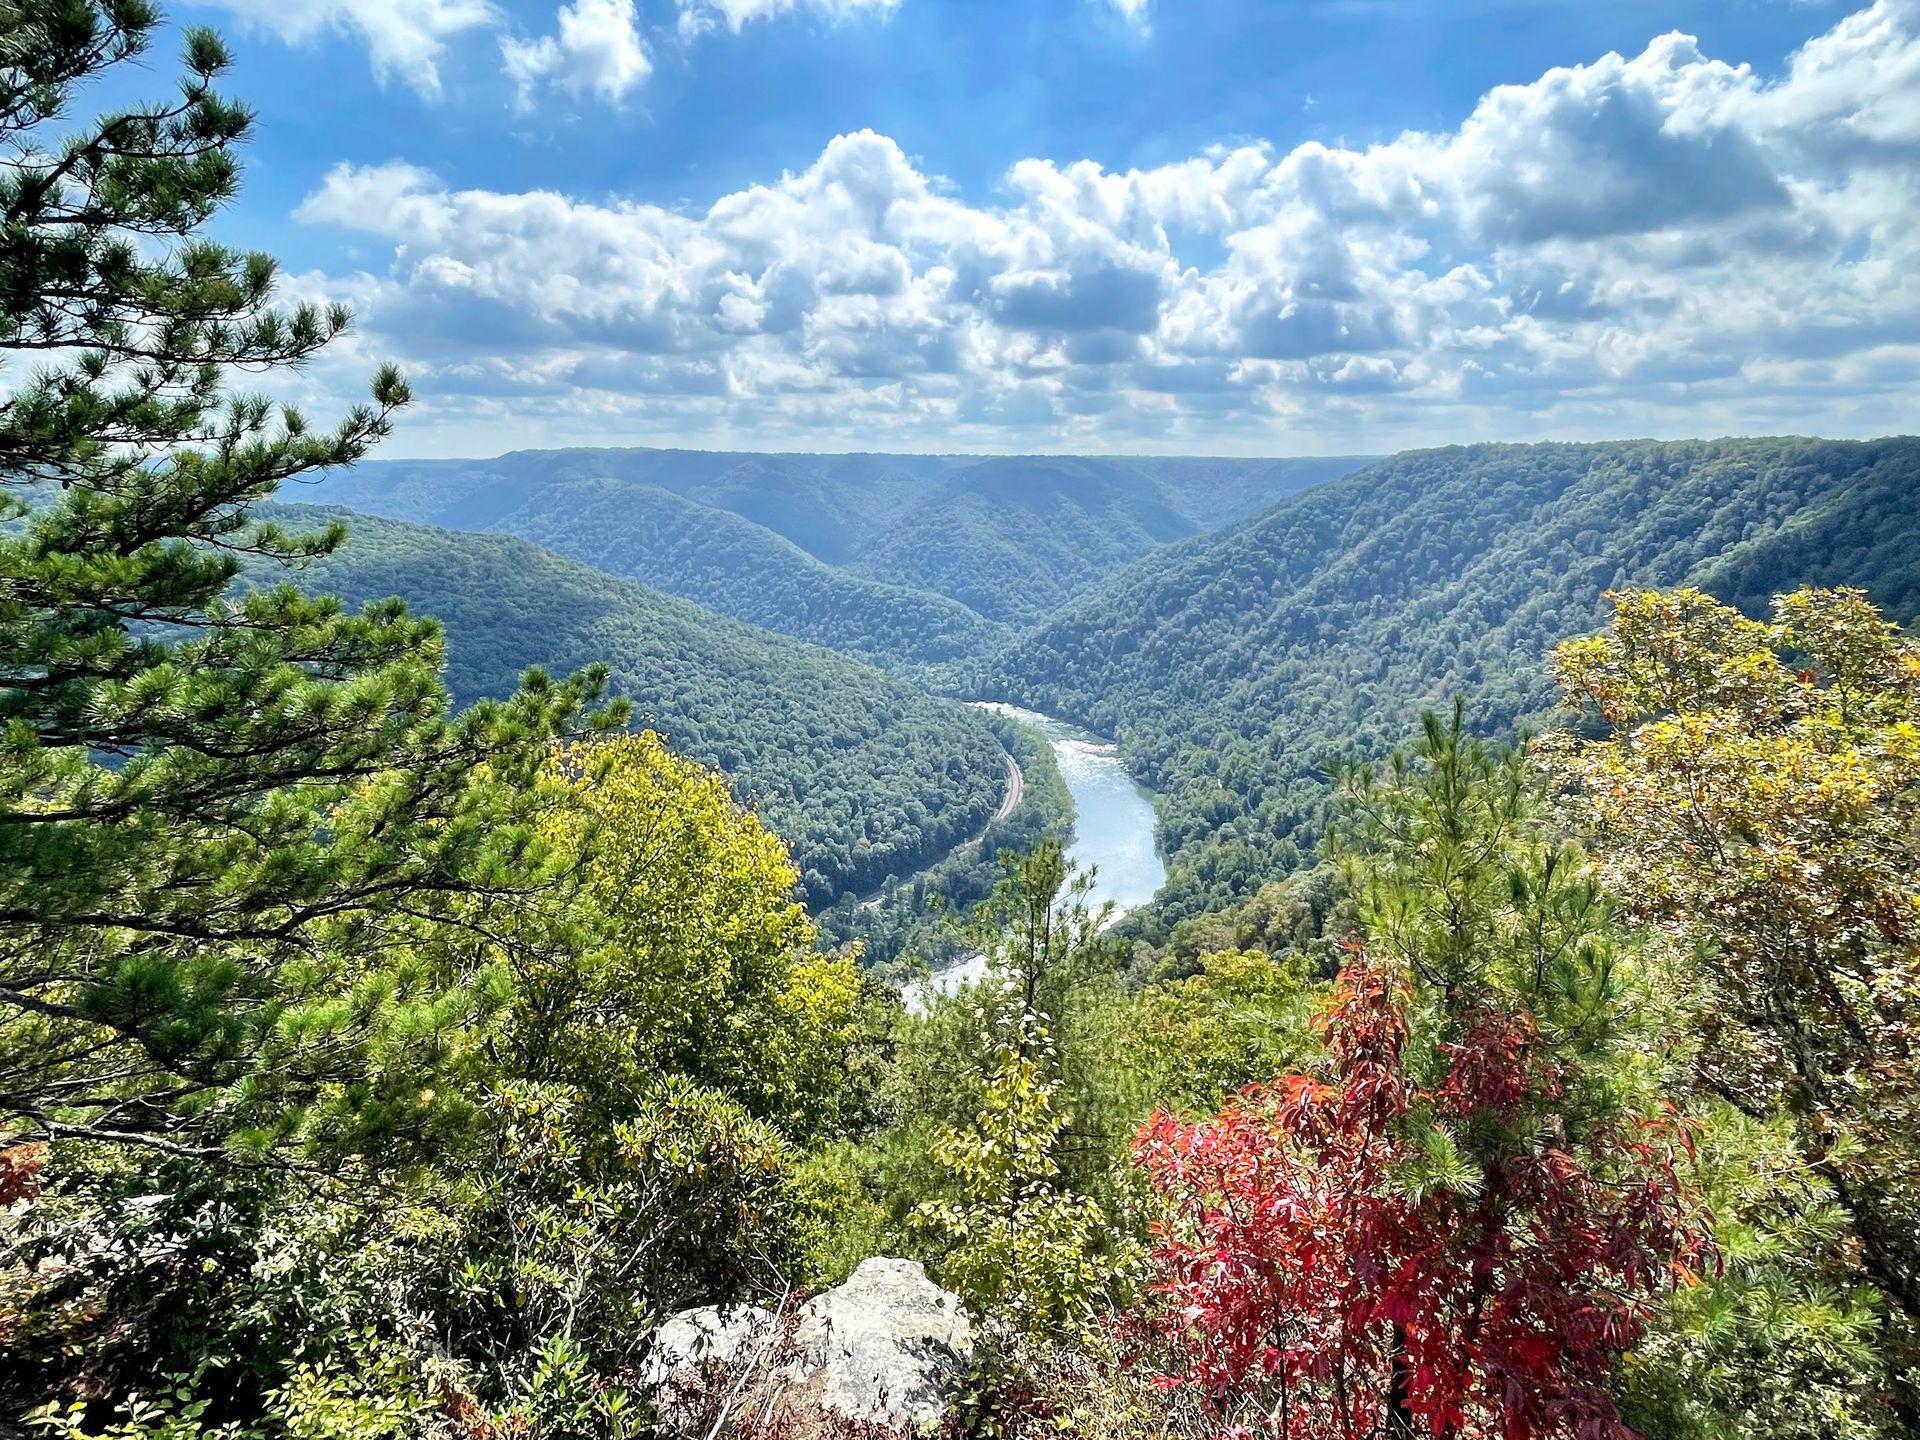 A view of the New River from an overlook in New River Gorge National Park.